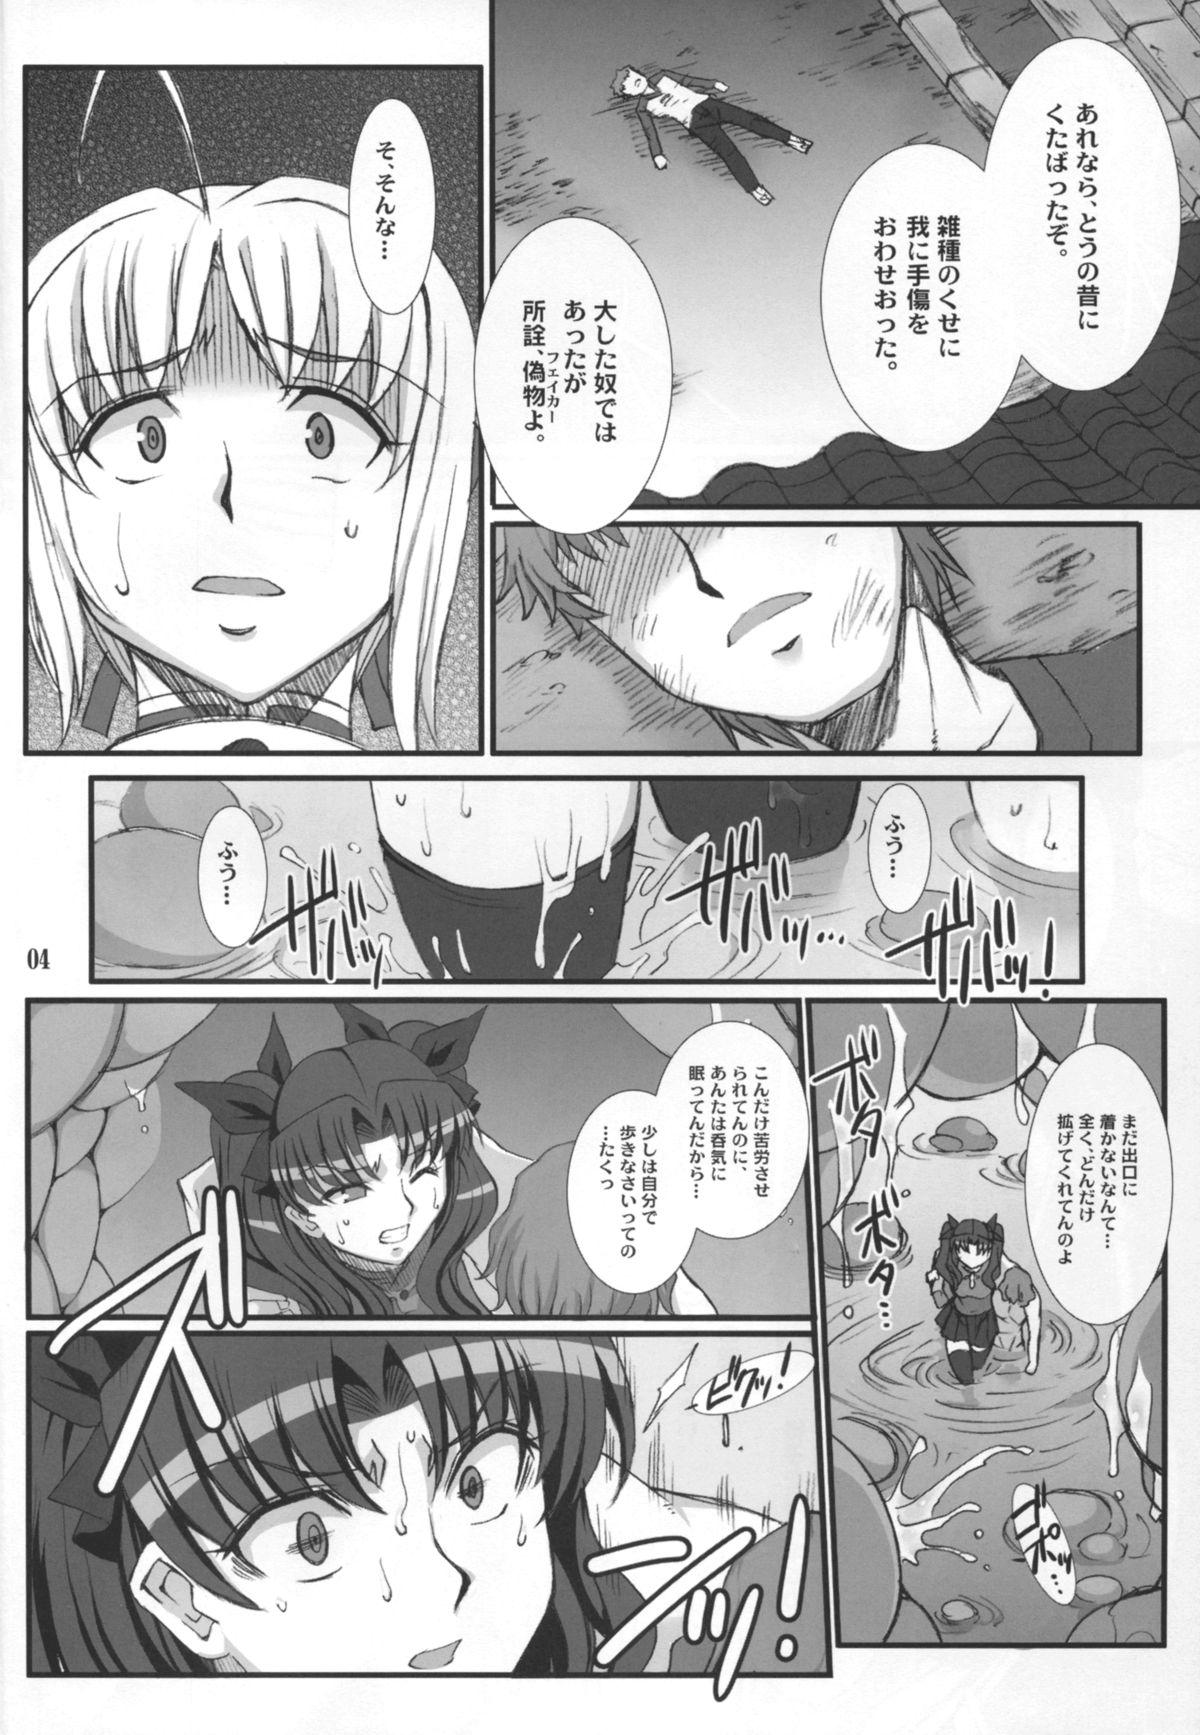 Old Young Rin Kai - Fate stay night Delicia - Page 4